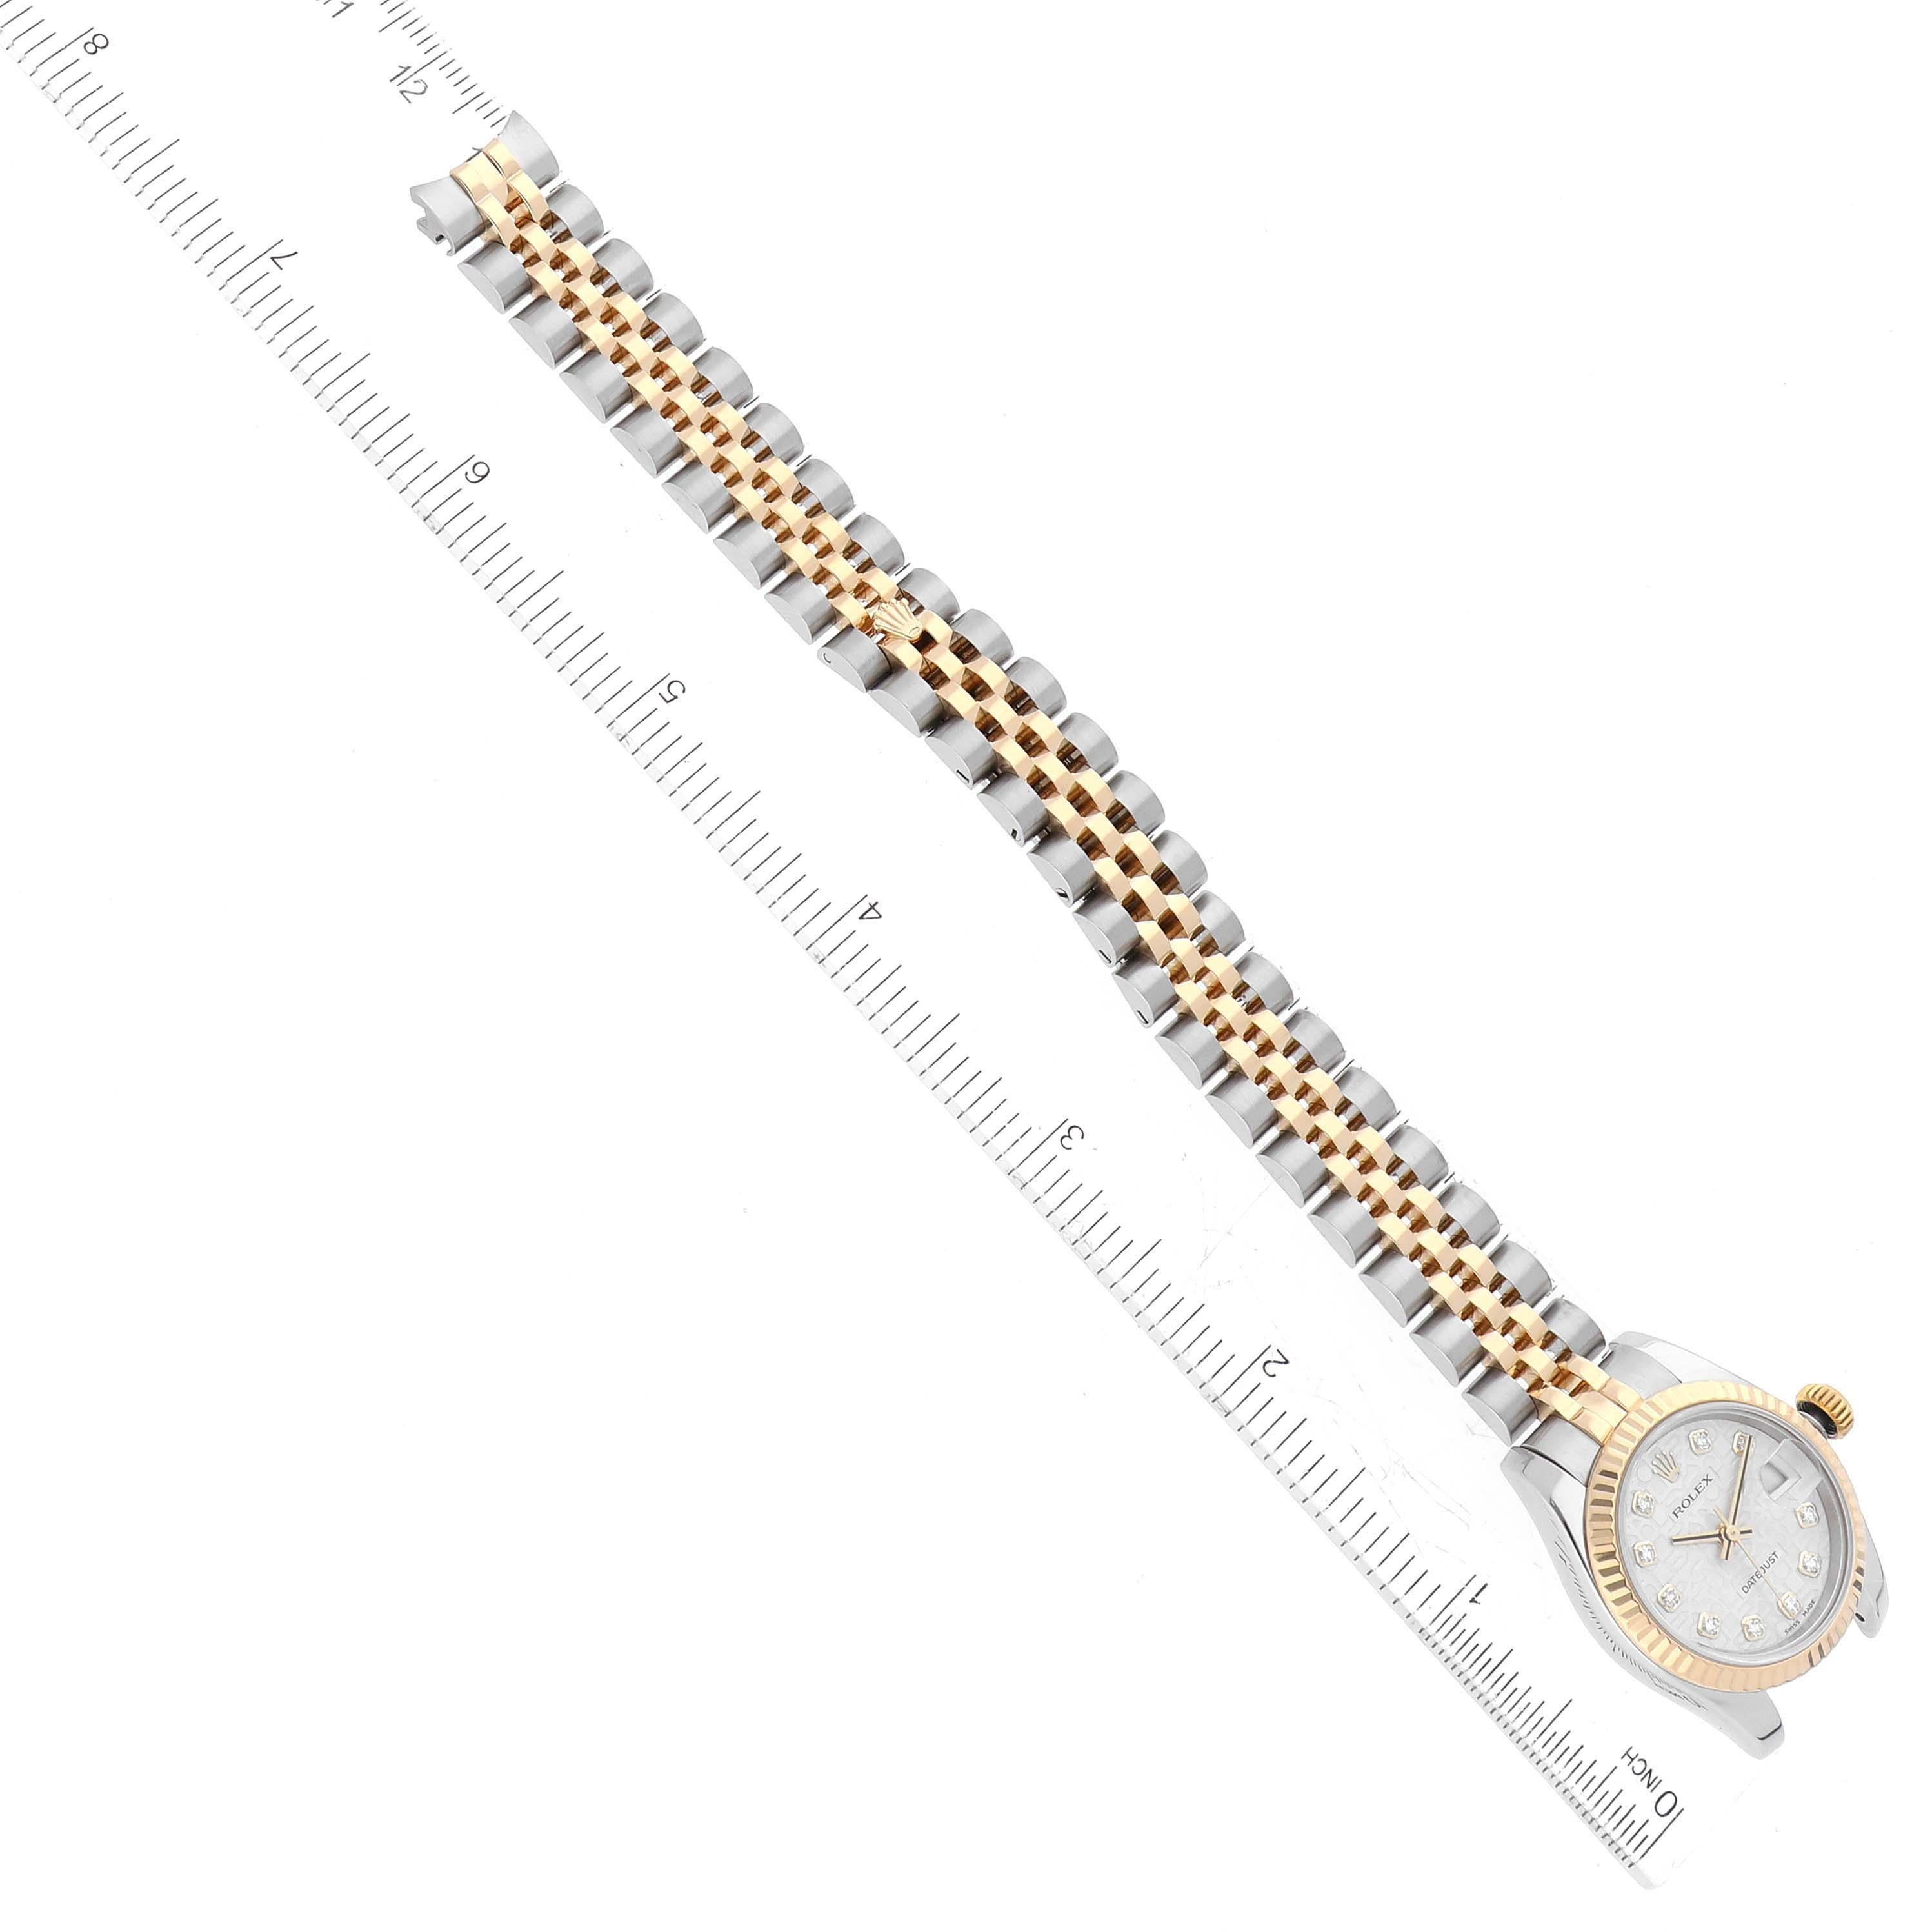 Rolex Datejust Steel Yellow Gold Anniversary Diamond Dial Ladies Watch 179173 For Sale 6